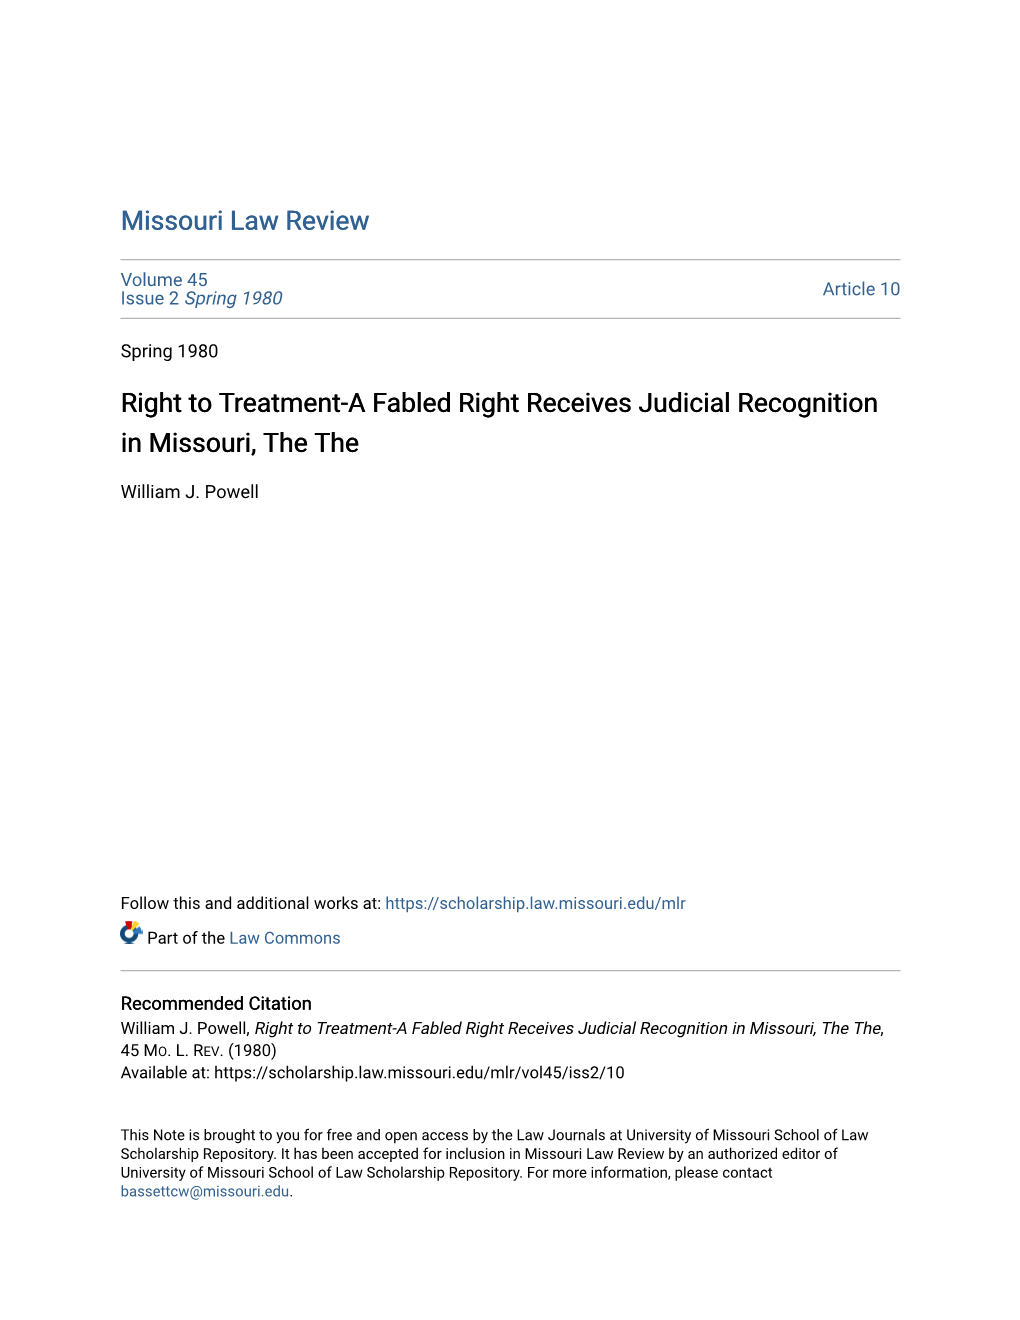 Right to Treatment-A Fabled Right Receives Judicial Recognition in Missouri, the The